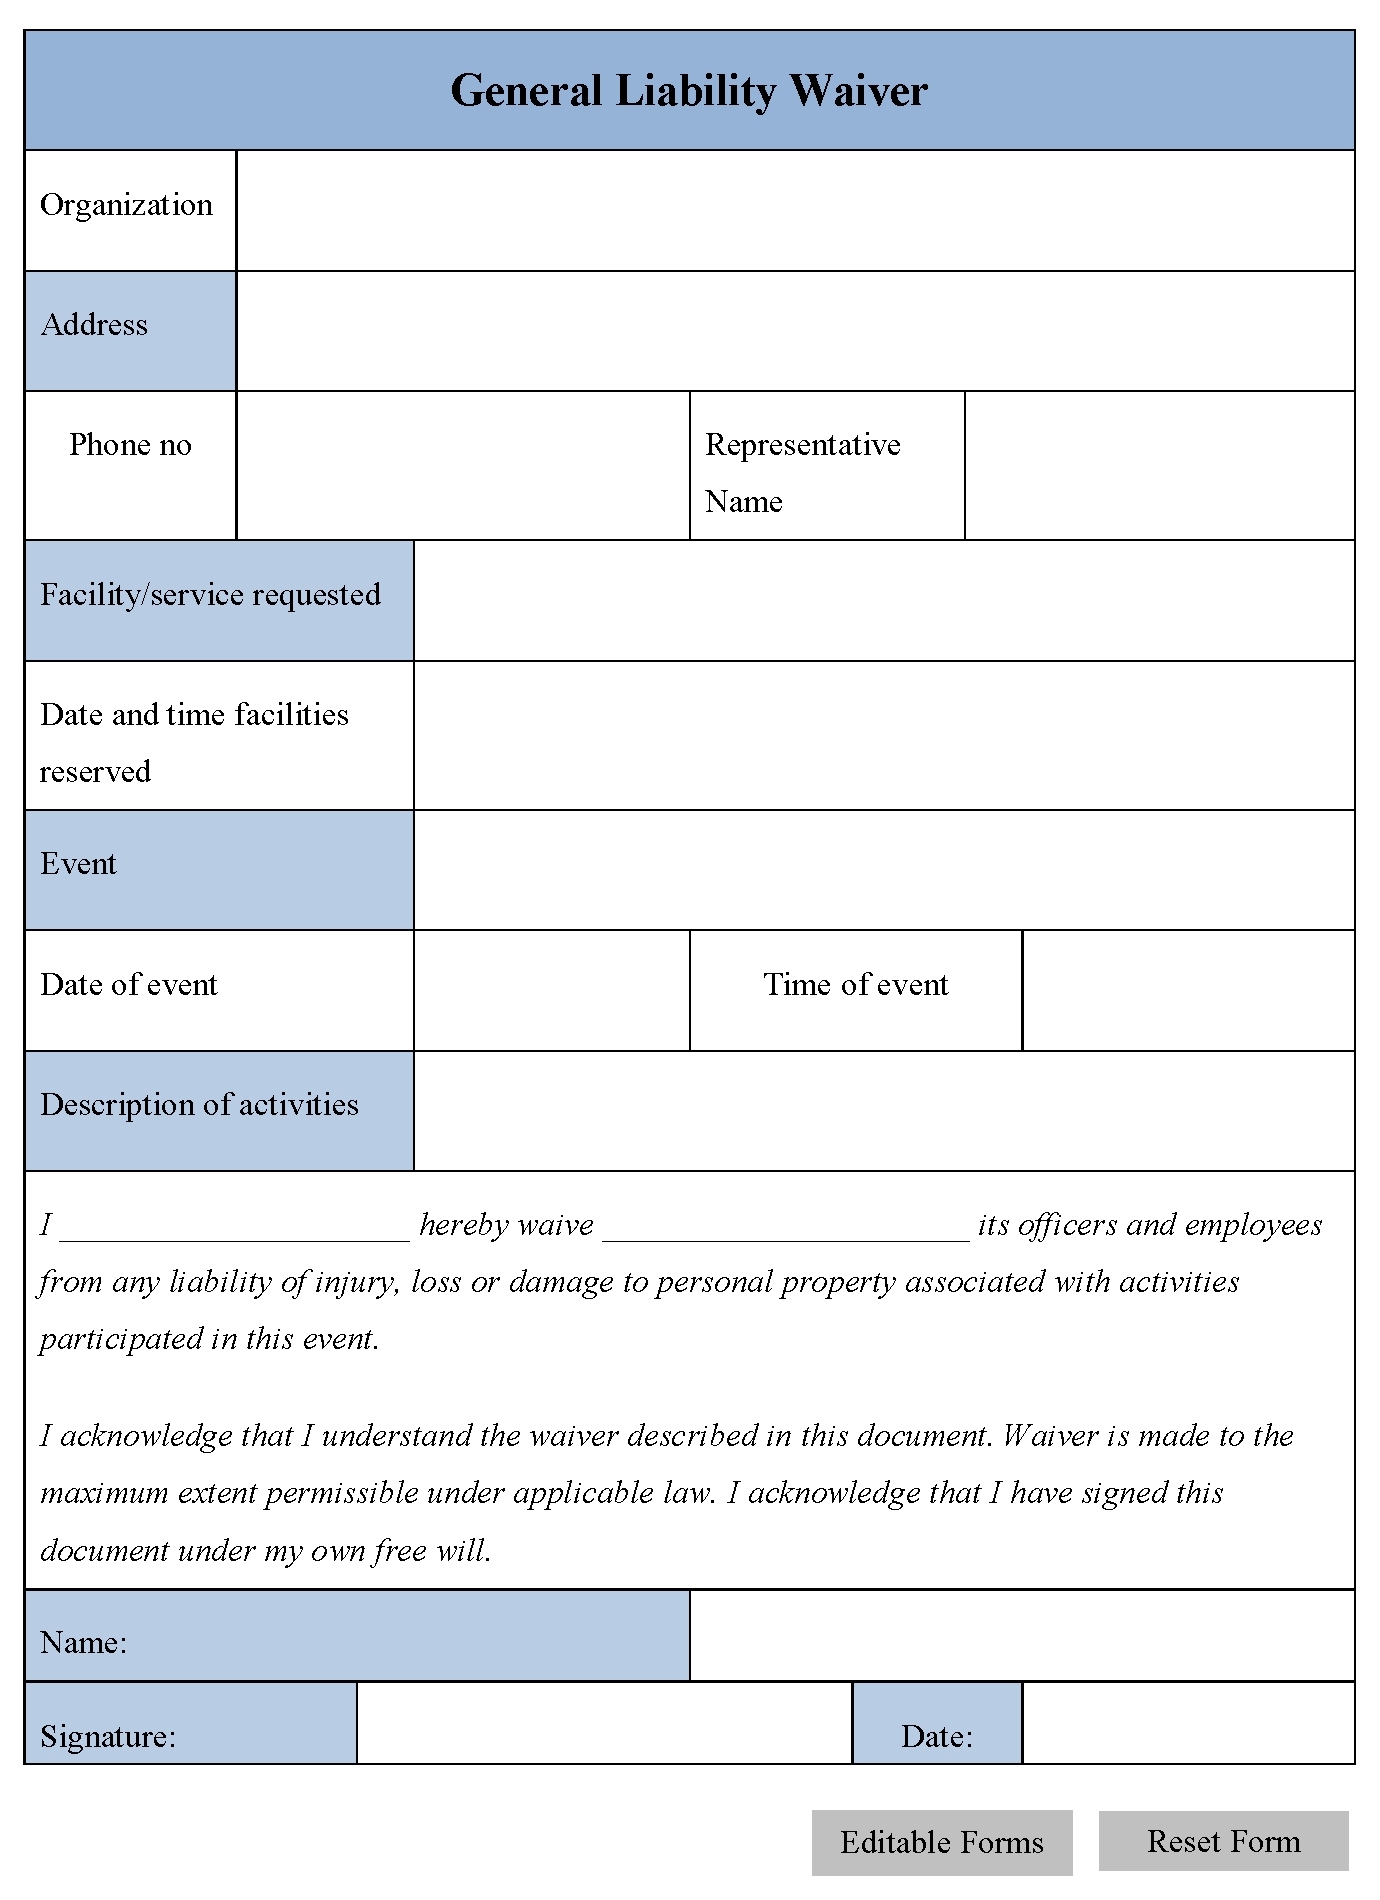 general-liability-waiver-form-editable-pdf-forms